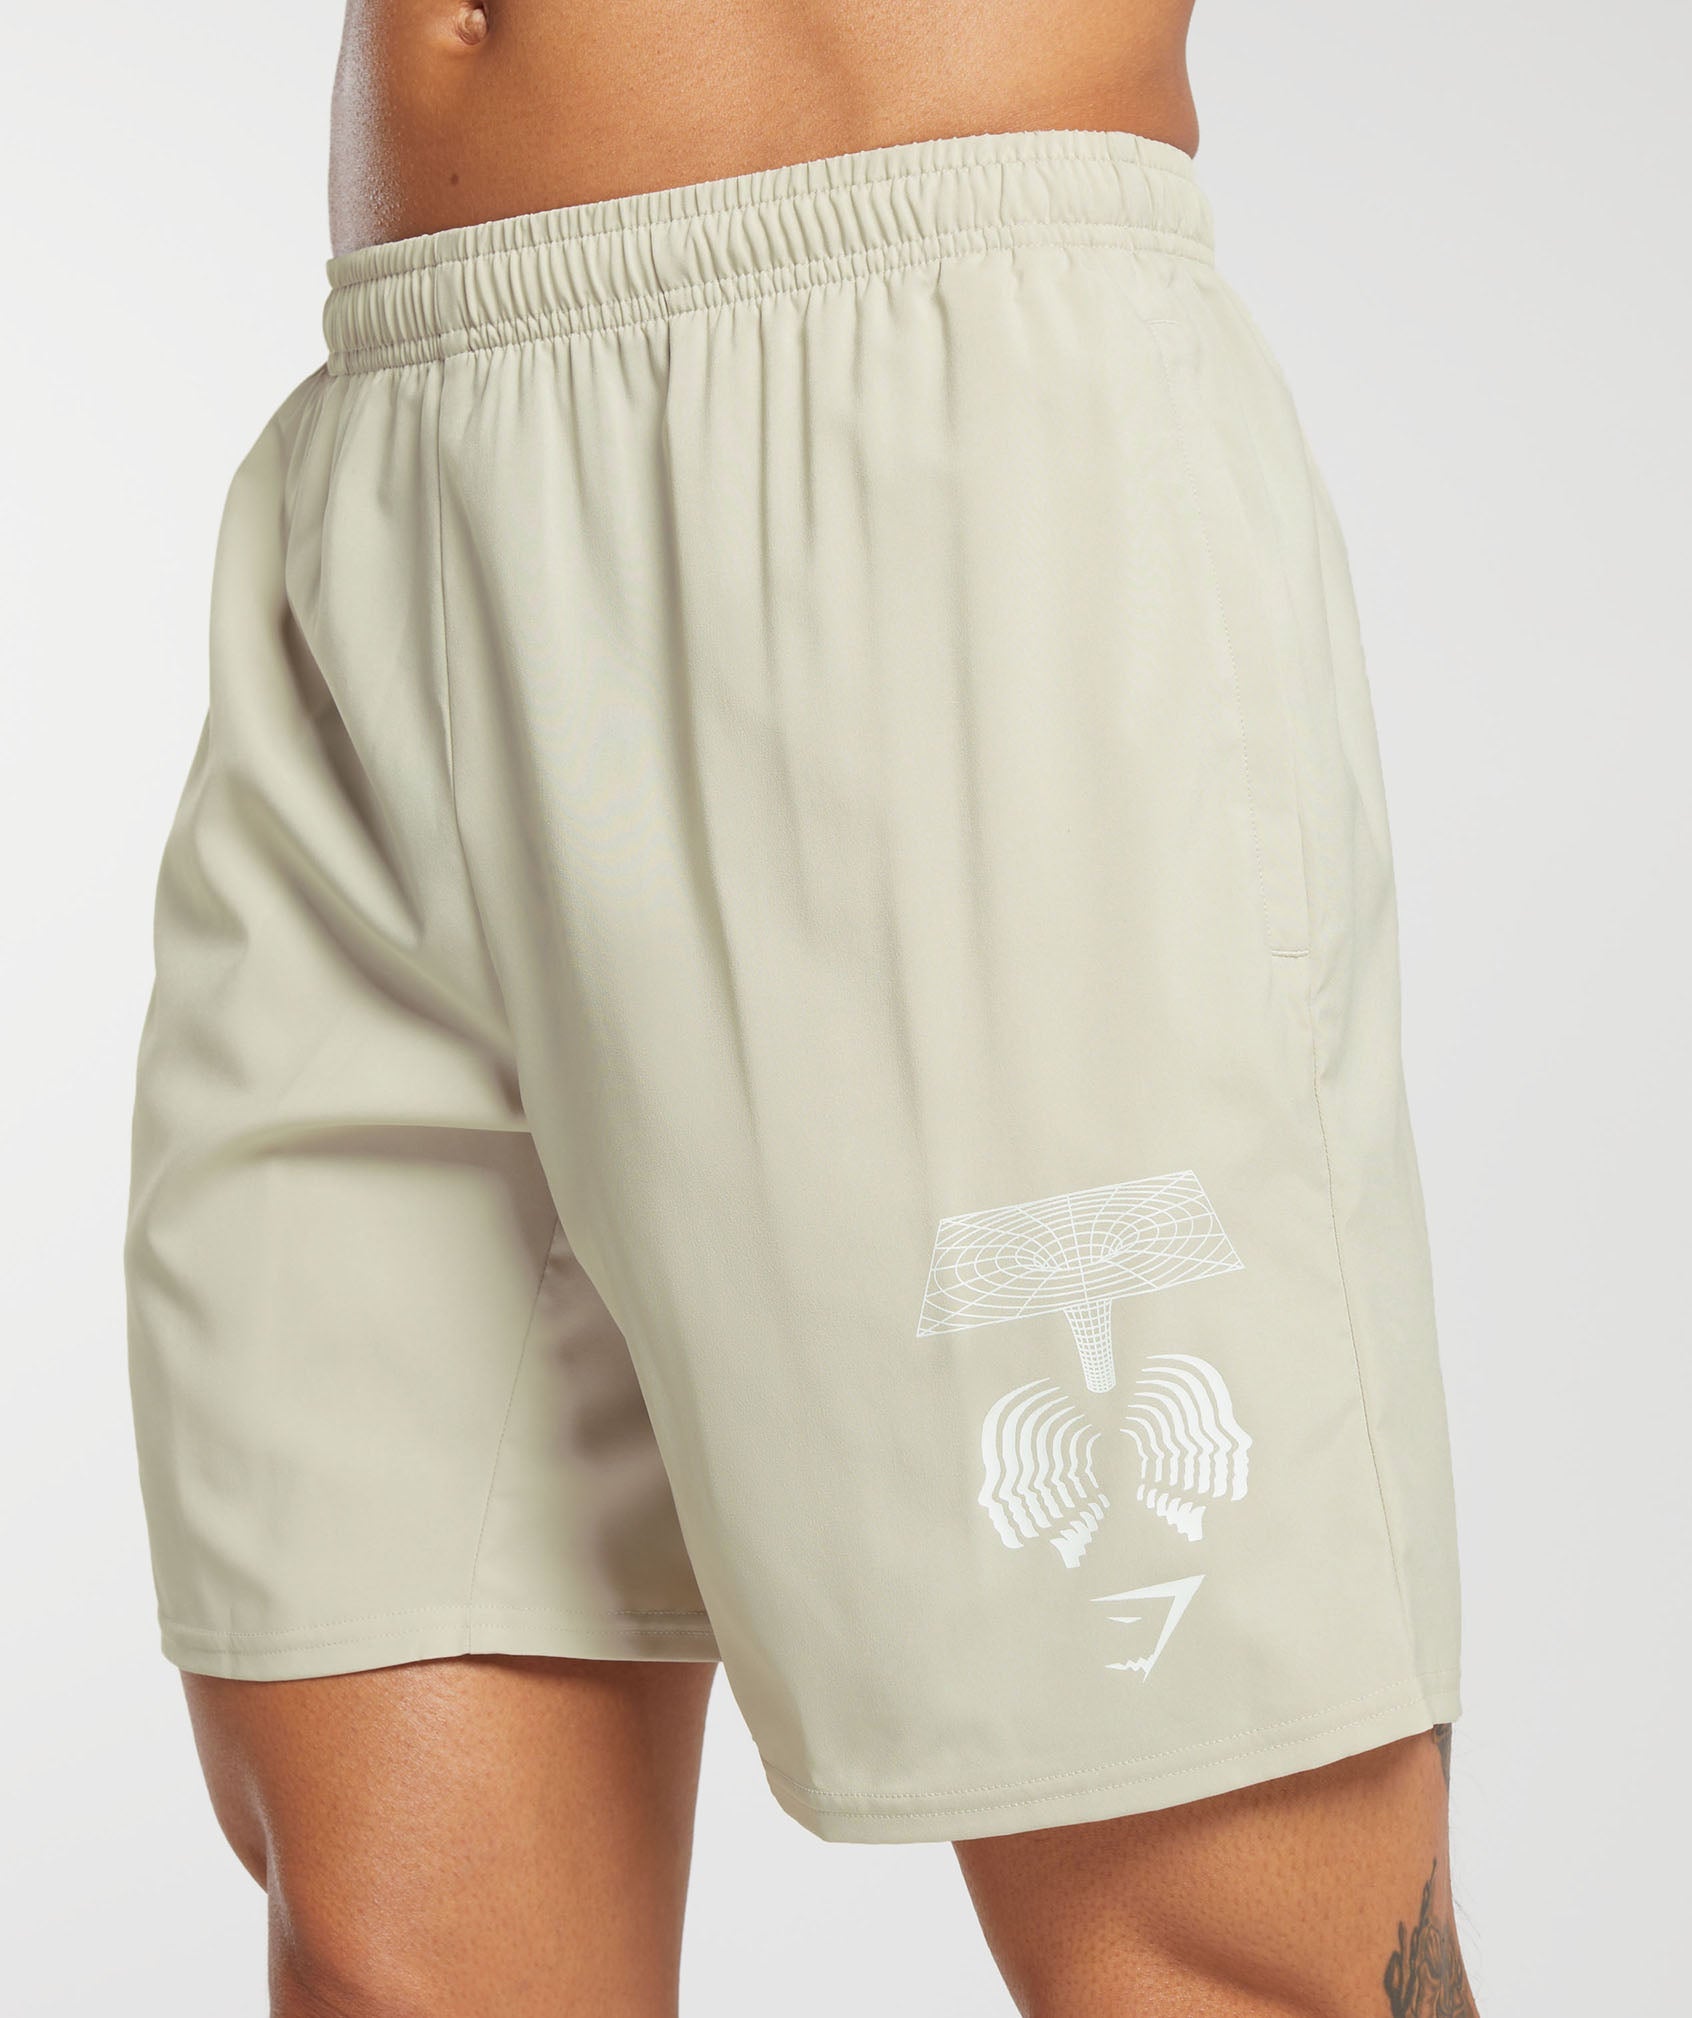 Hybrid Wellness 7" Shorts in Pebble Grey - view 5